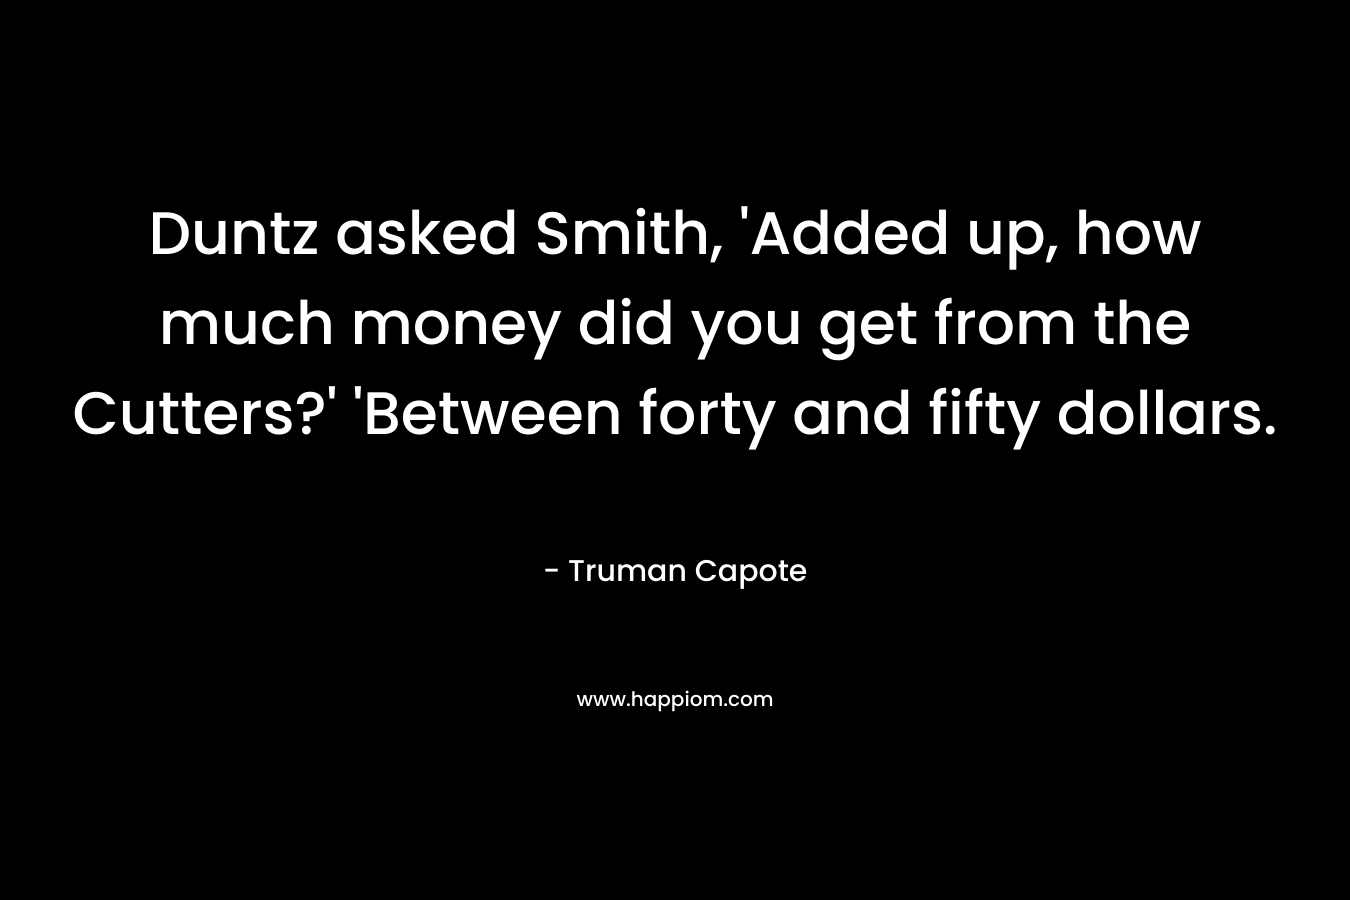 Duntz asked Smith, 'Added up, how much money did you get from the Cutters?' 'Between forty and fifty dollars.